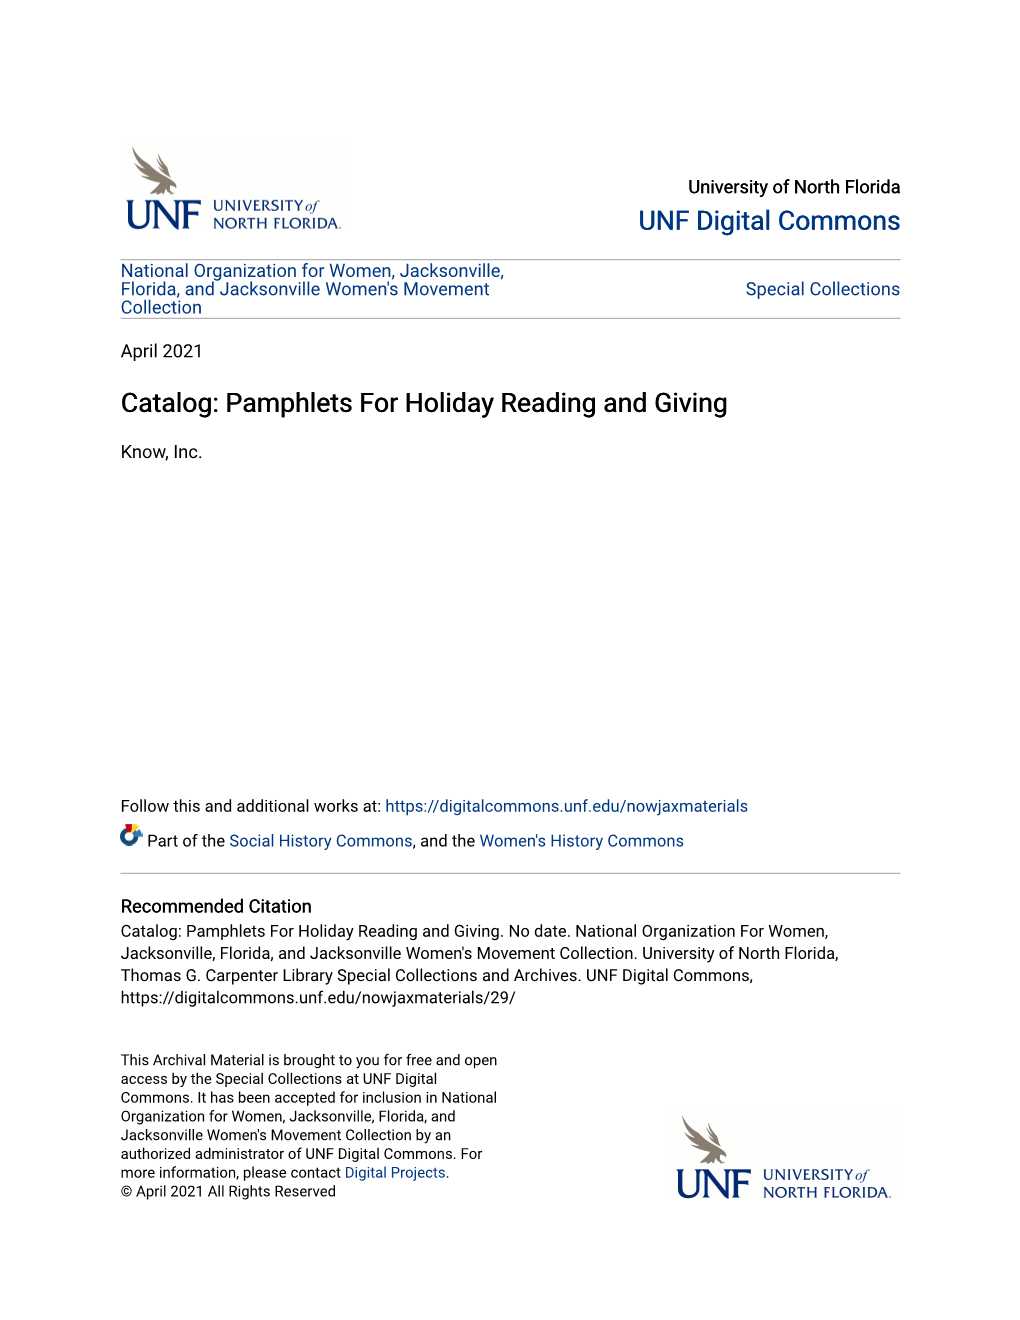 Catalog: Pamphlets for Holiday Reading and Giving